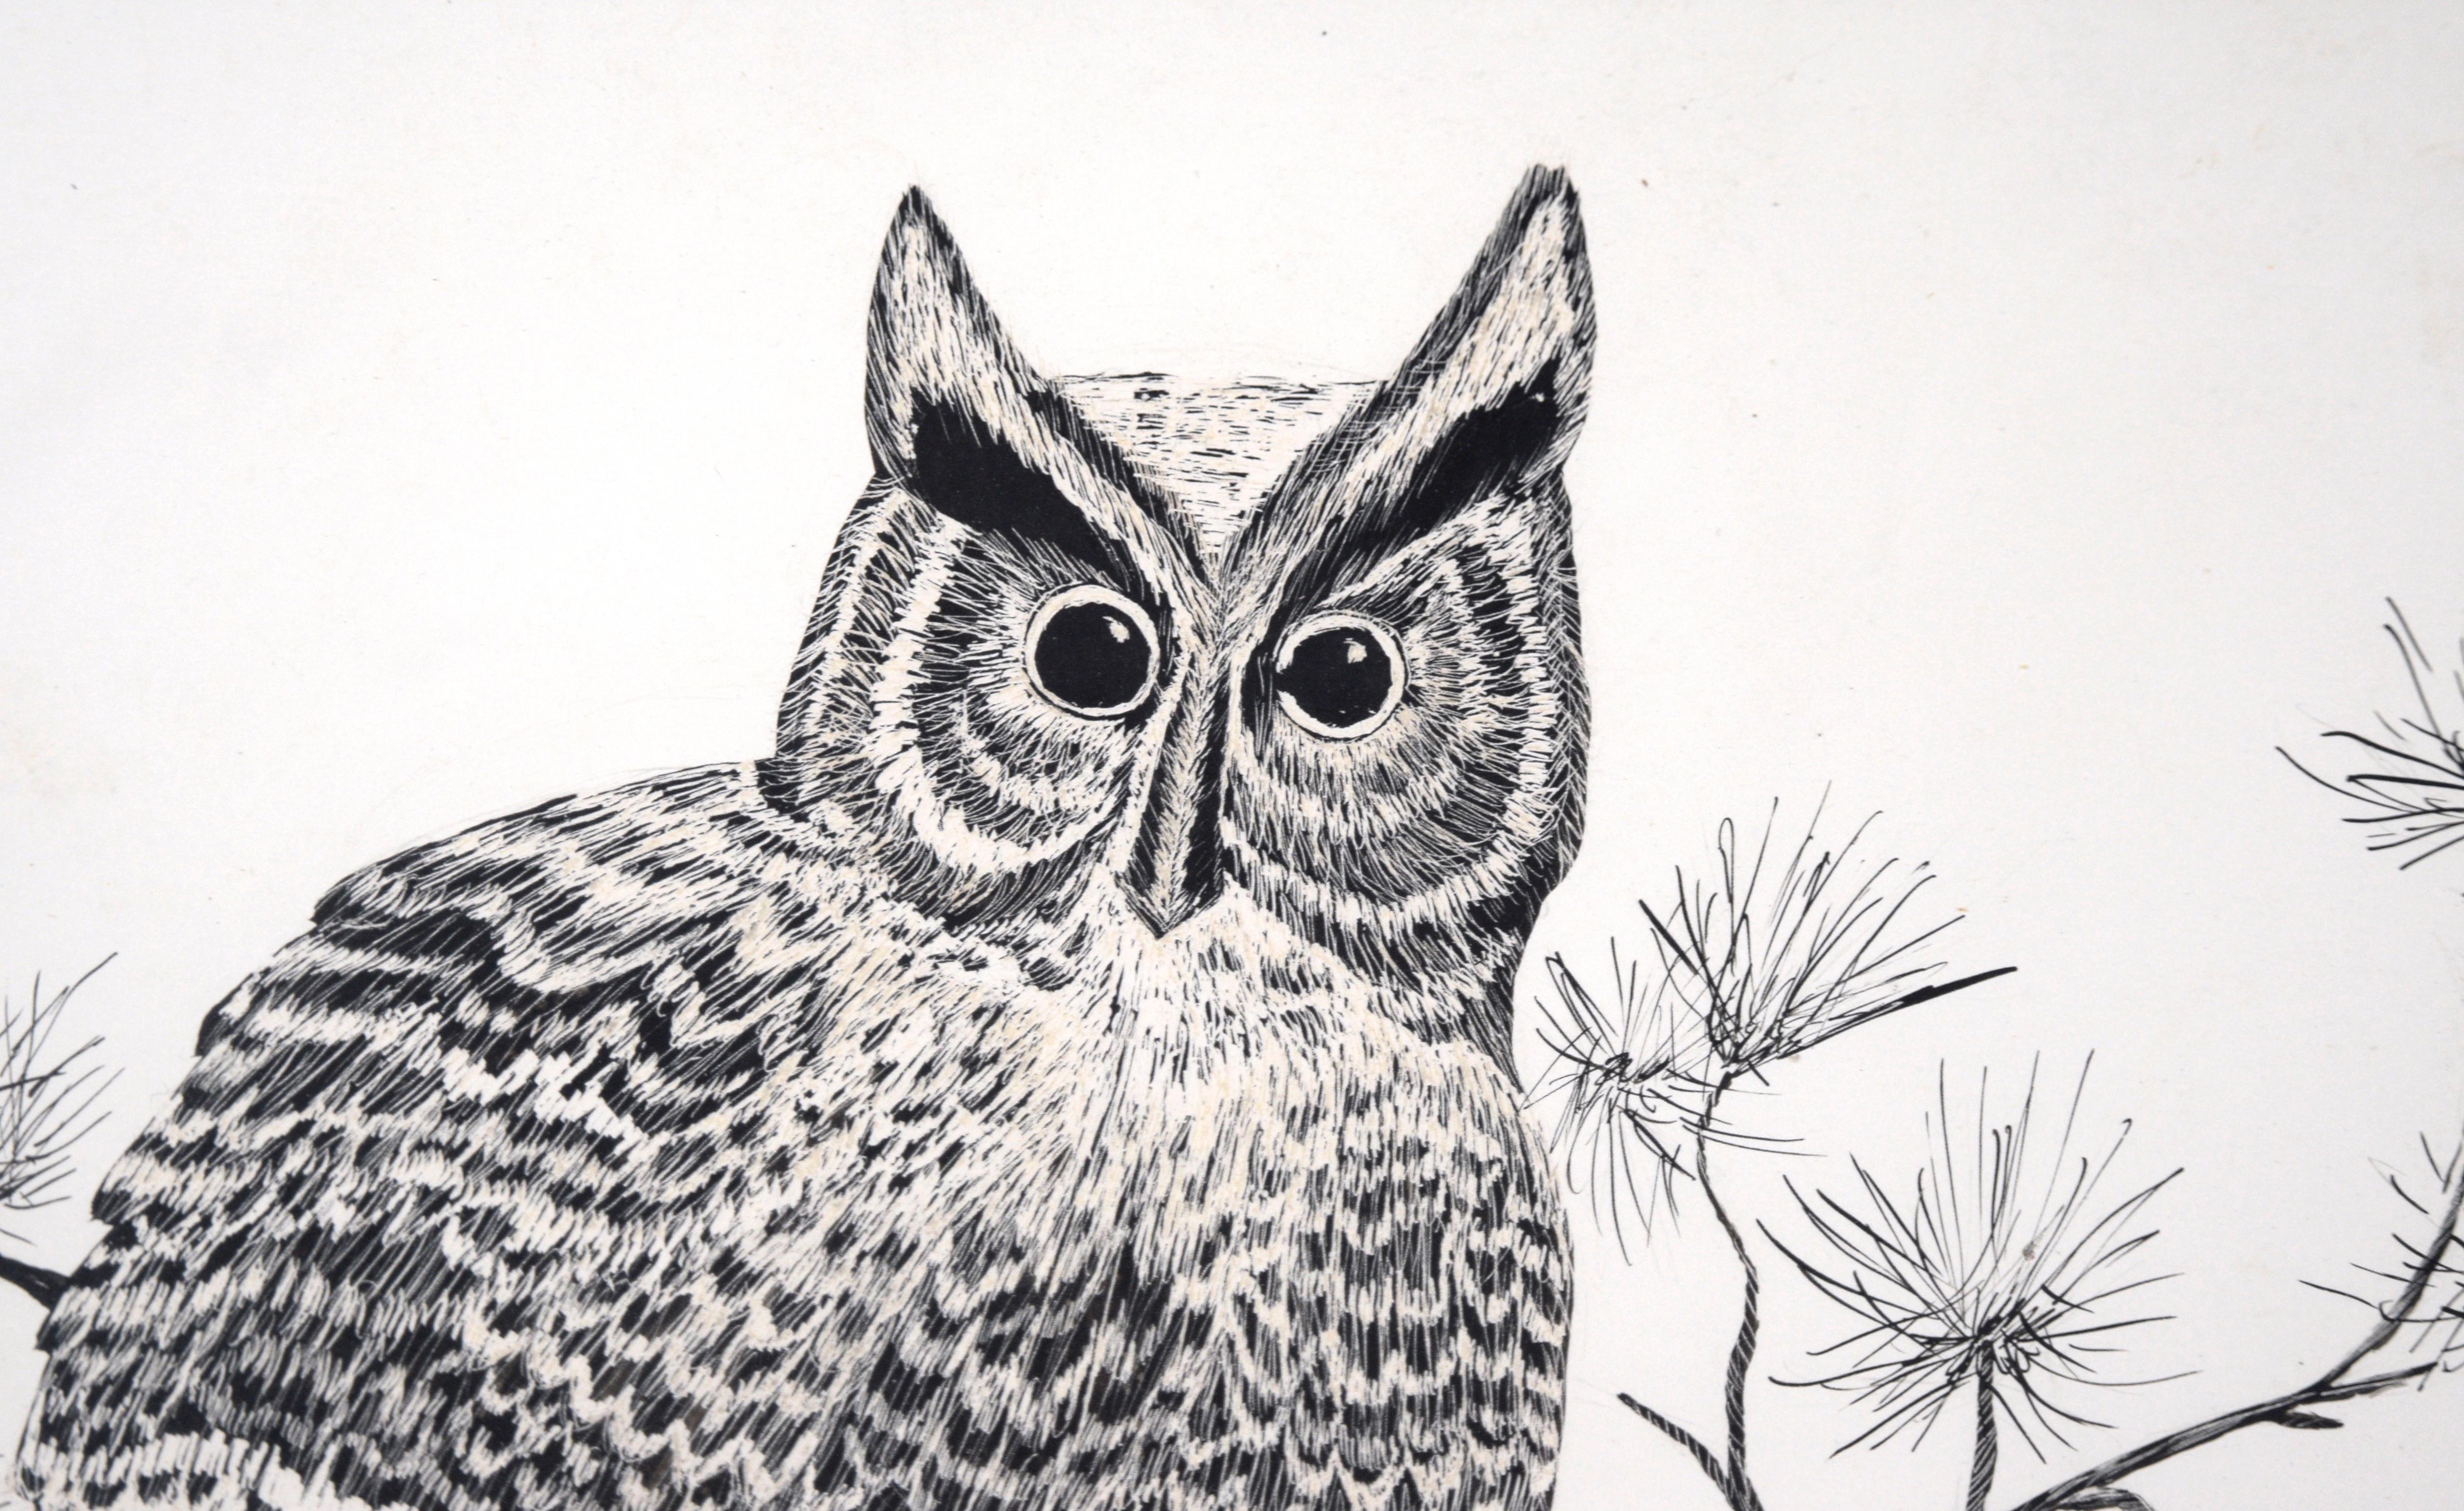 Great Horned Owl Sitting on a Branch - Illustration in Ink on Cardstock

Detailed illustration of an owl by M. Kochmaruk (20th Century). The piece is wonderfully detailed, with careful attention paid to the texture of feathers and bark. The artist